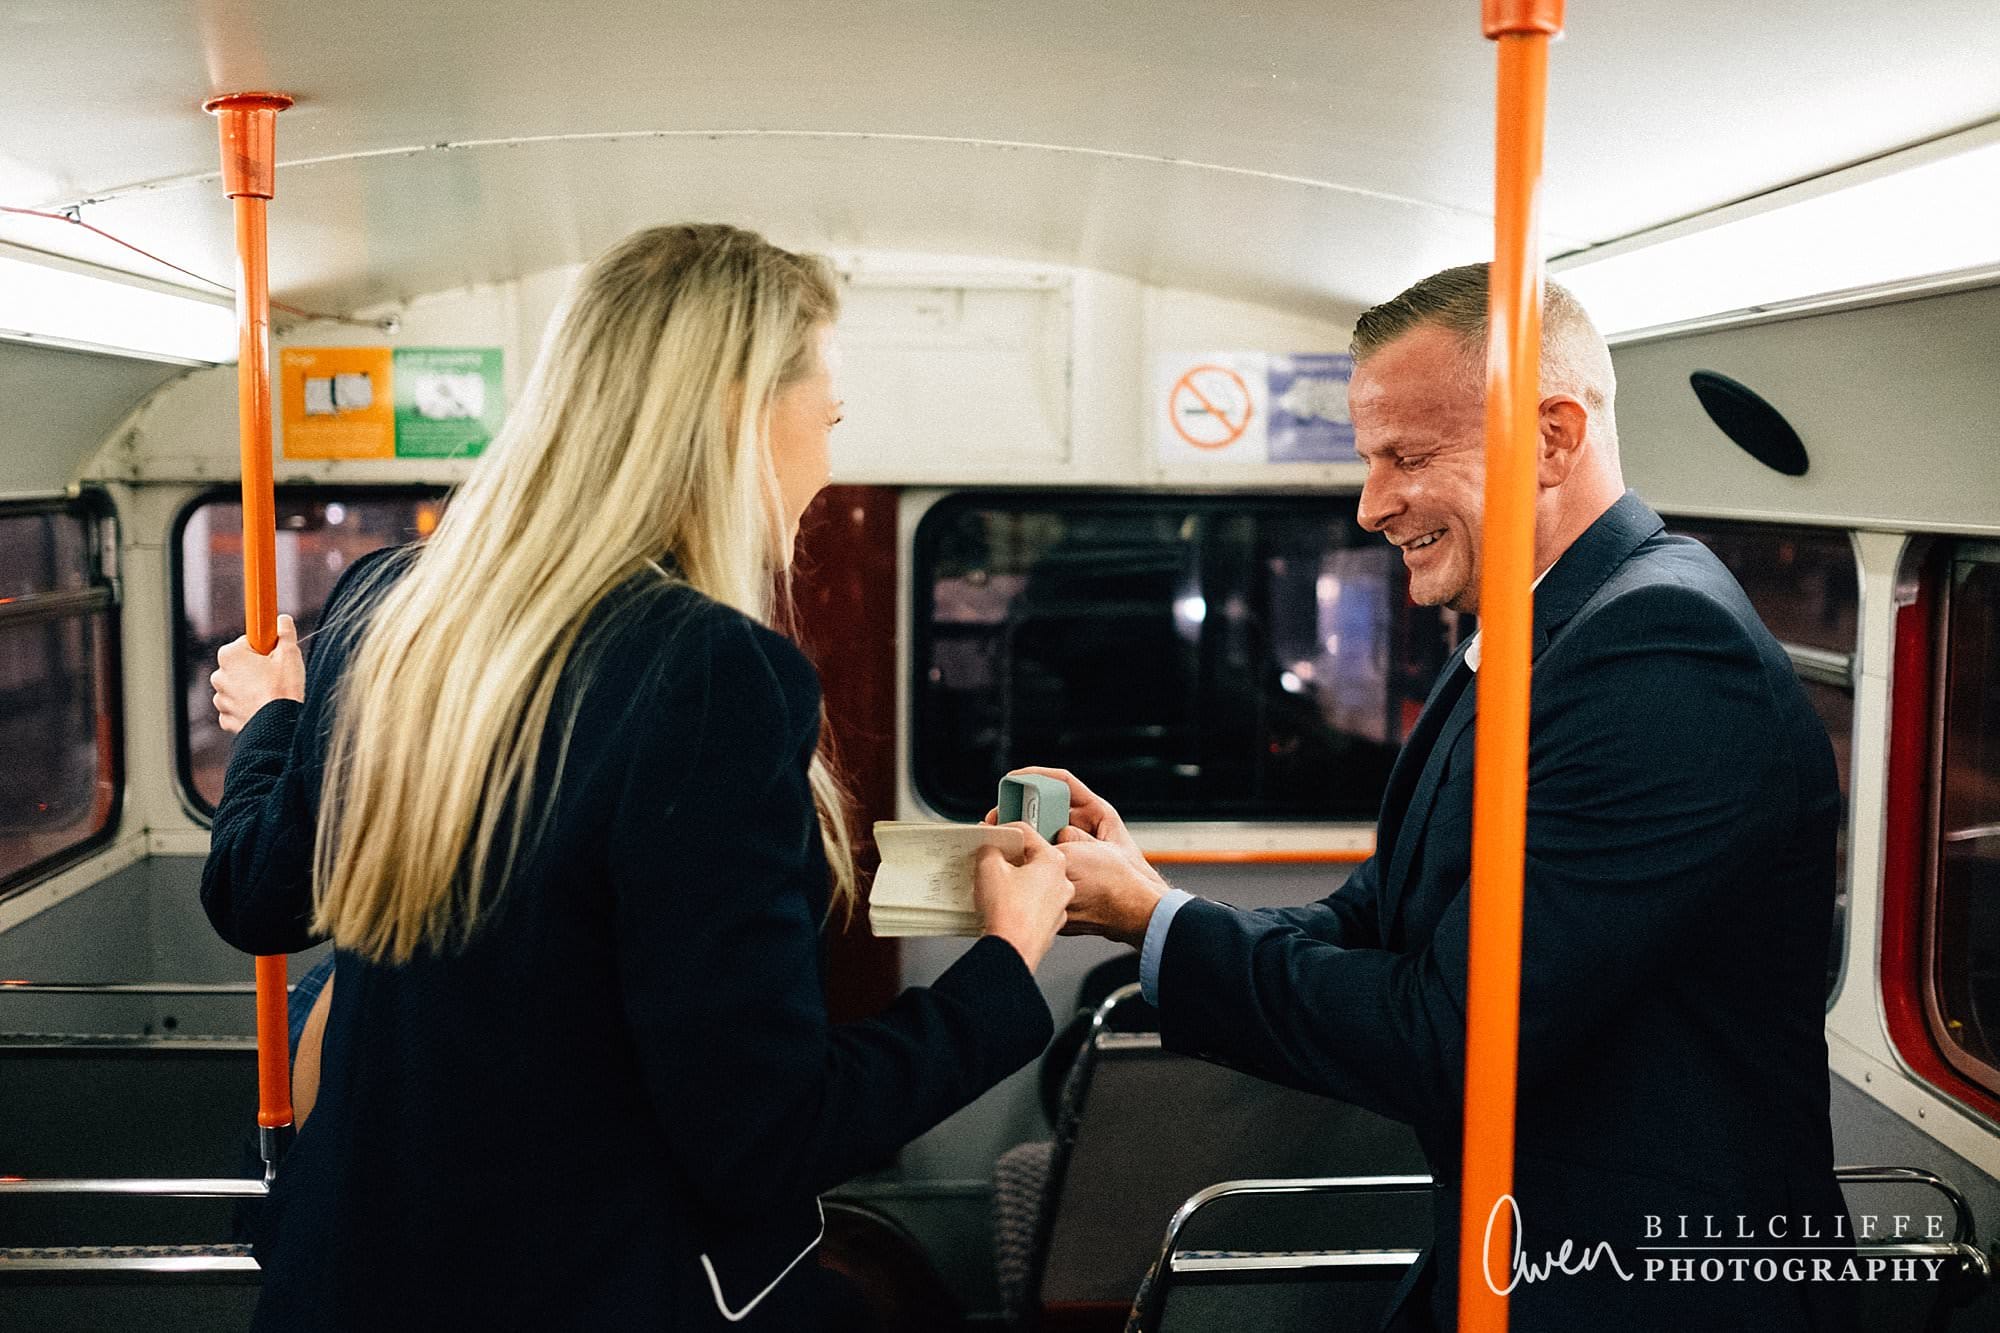 london engagement proposal photographer routemaster RE 009 - When Richard Proposed To Emma on a London Routemaster Bus